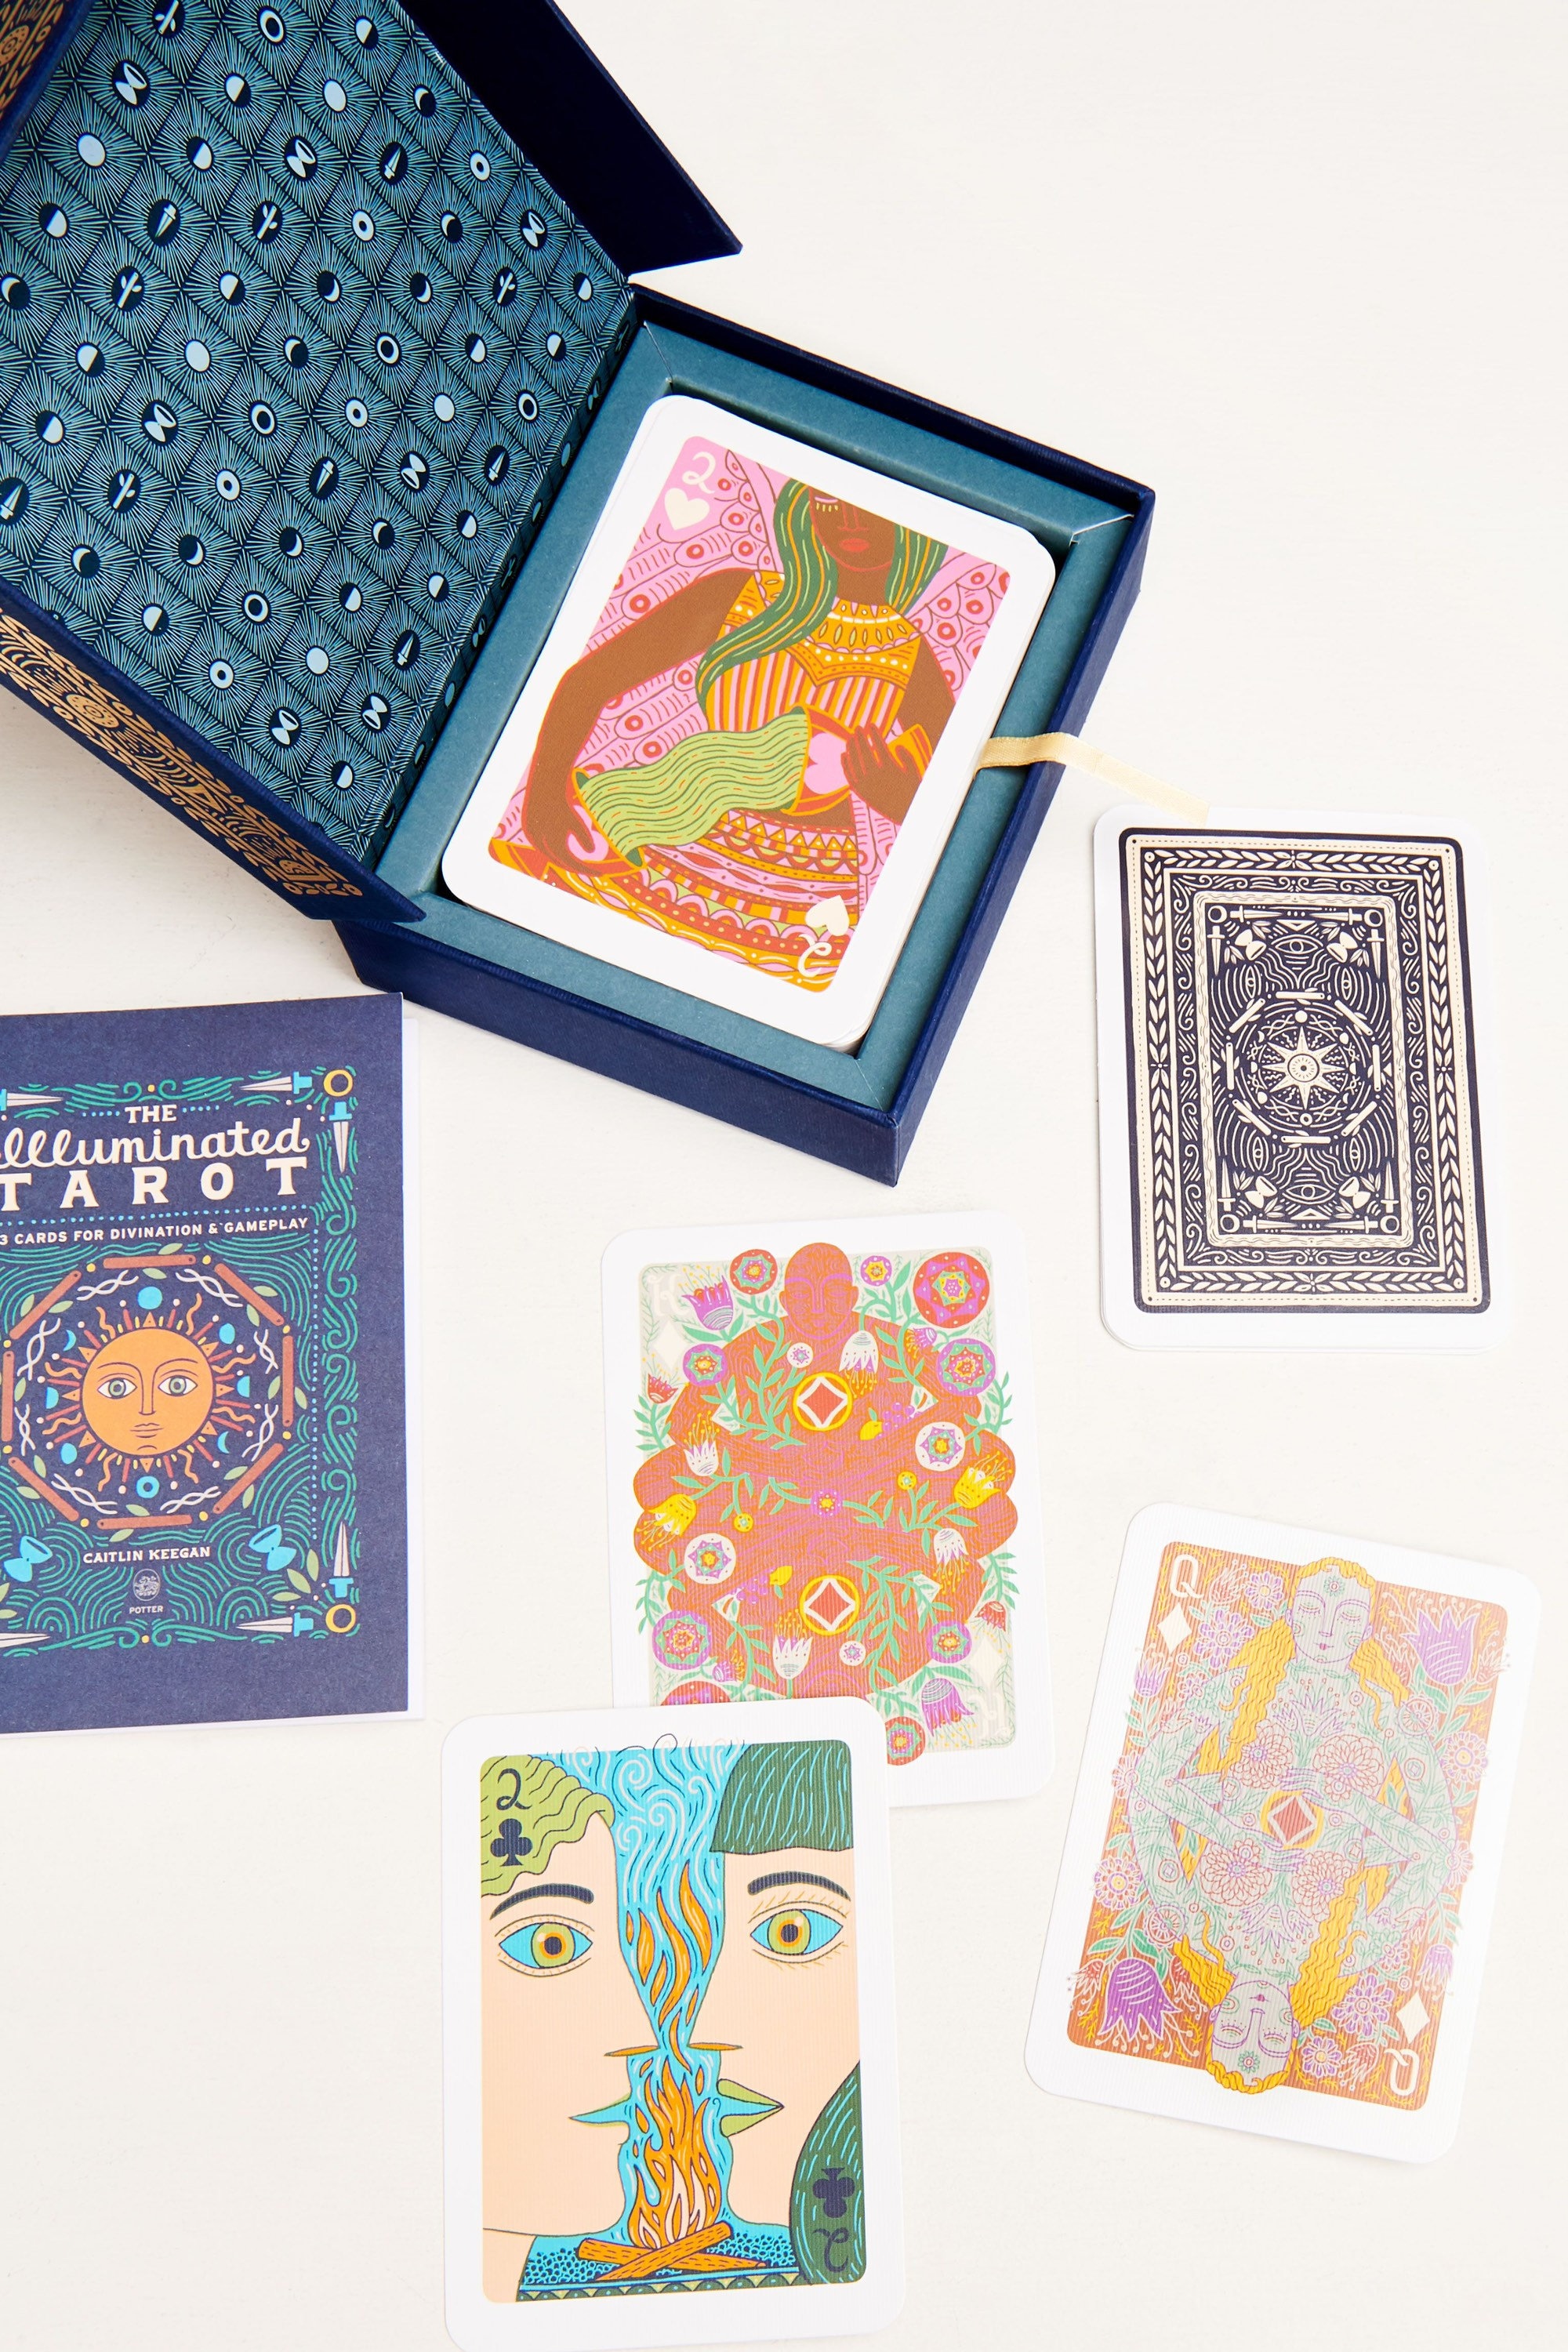 Illuminated Tarot: 53 Cards for Divination & Gameplay With Etsy